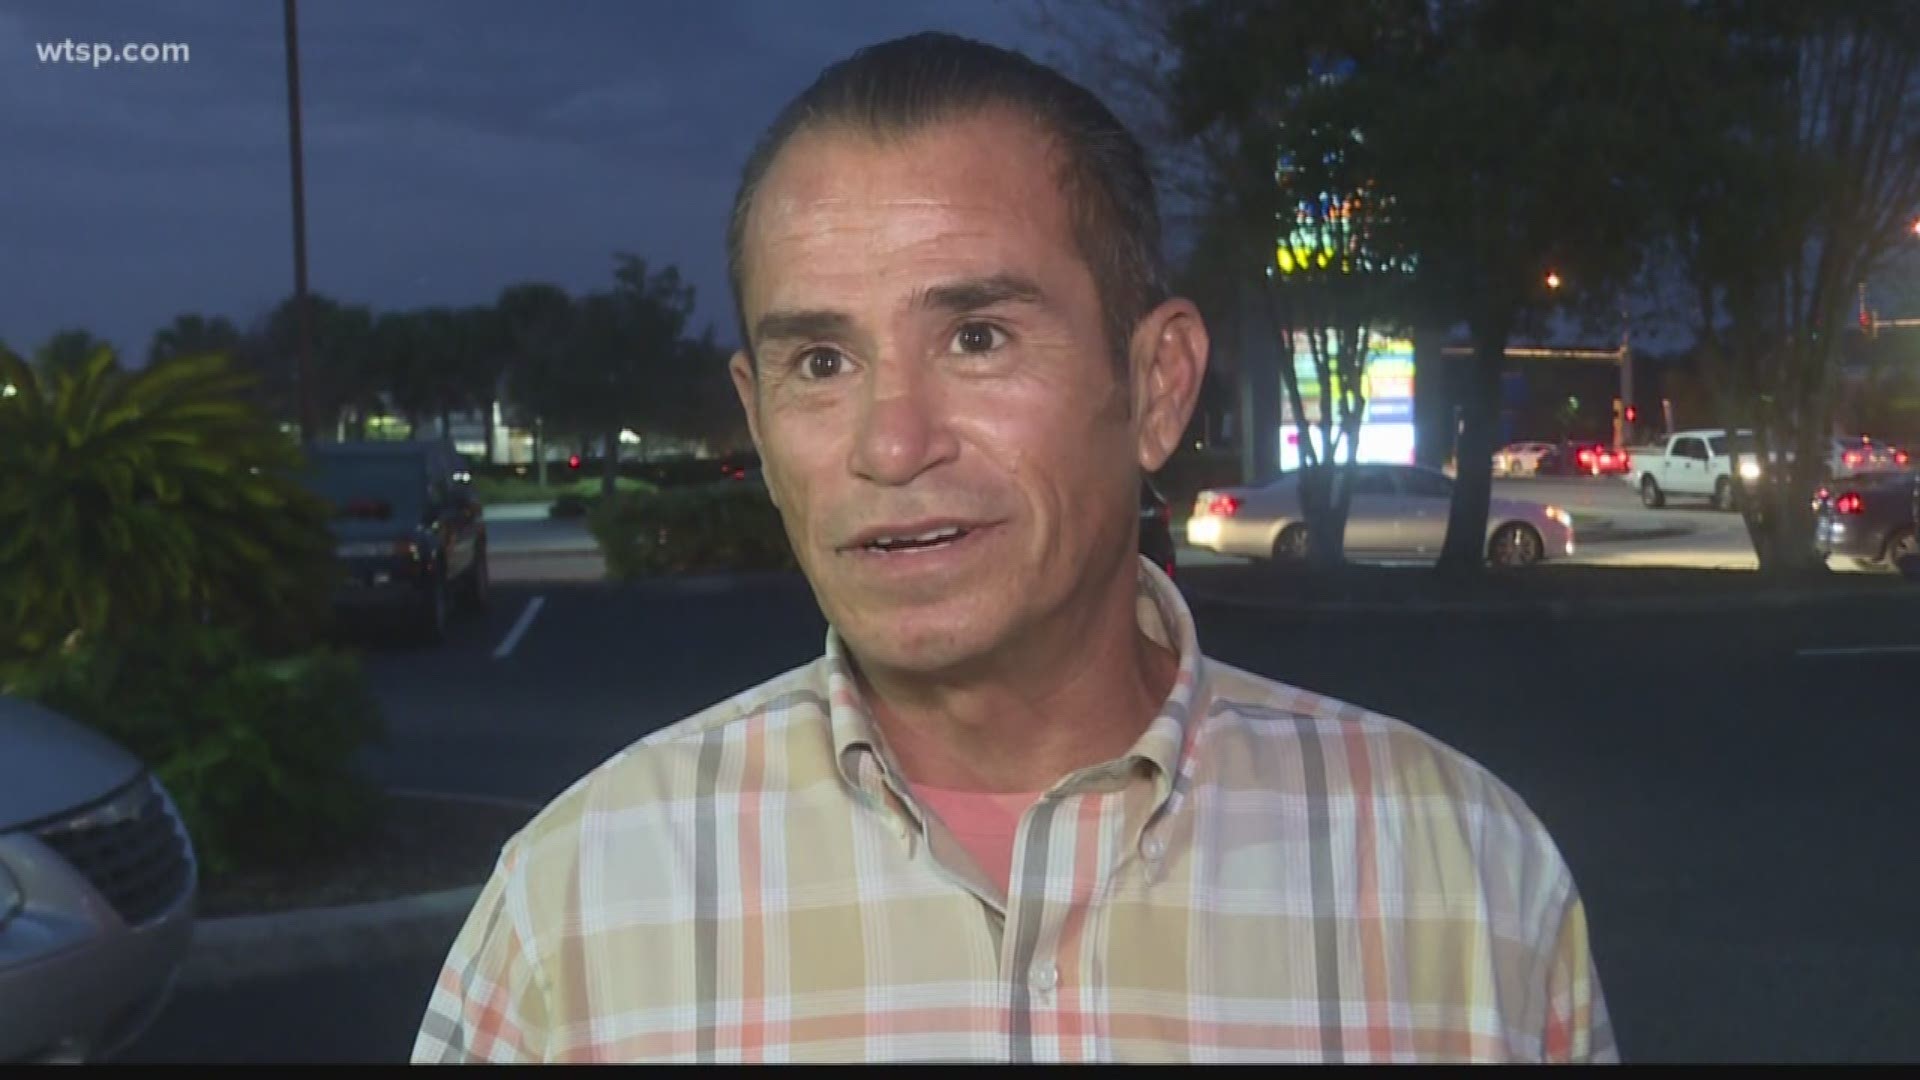 Abel Gutierrez moved to Florida and found himself struggling. Local groups have since helped him get a job and a new car.